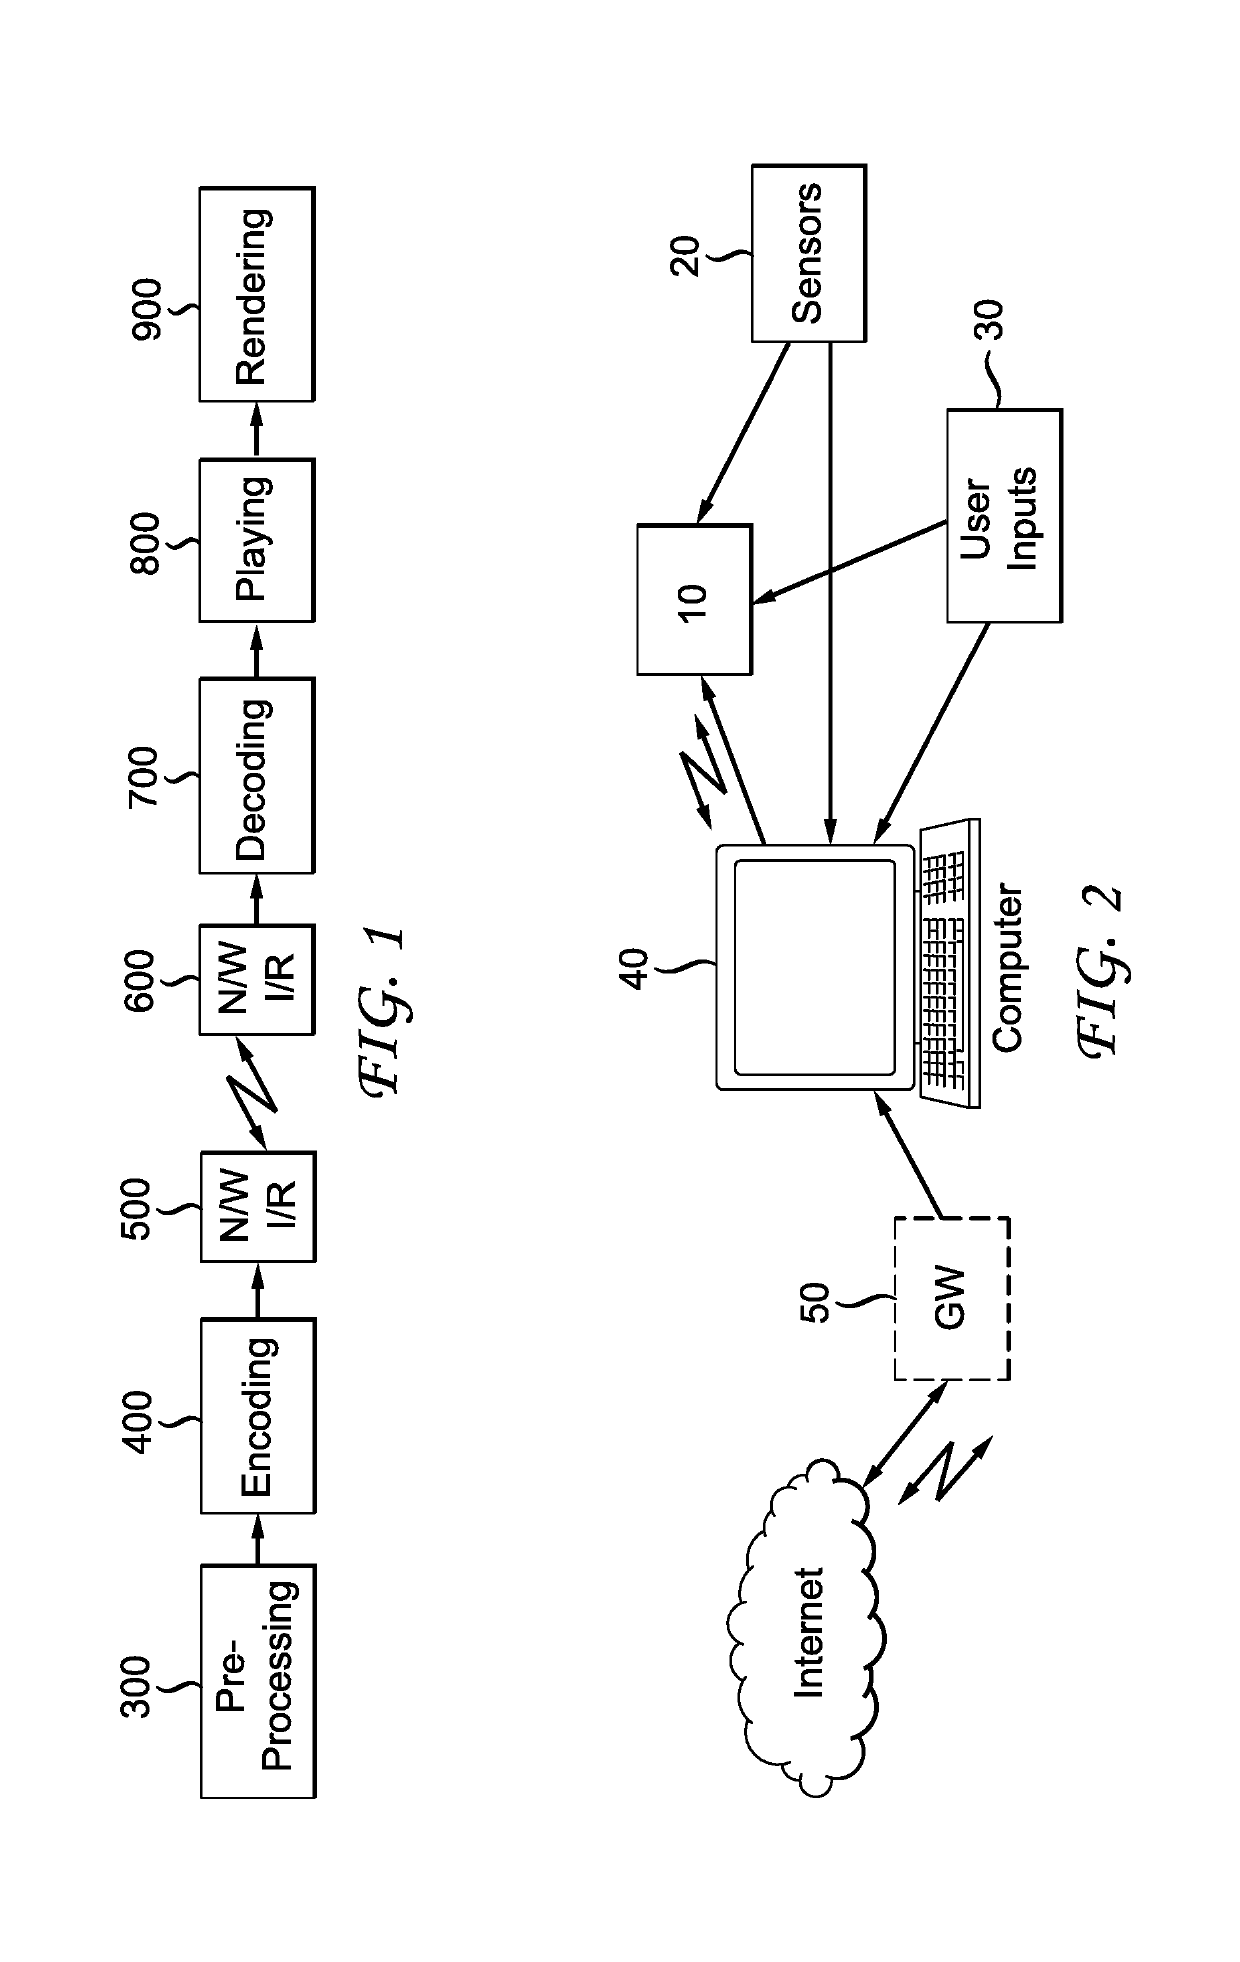 Method and apparatus for rectified motion compensation for omnidirectional videos